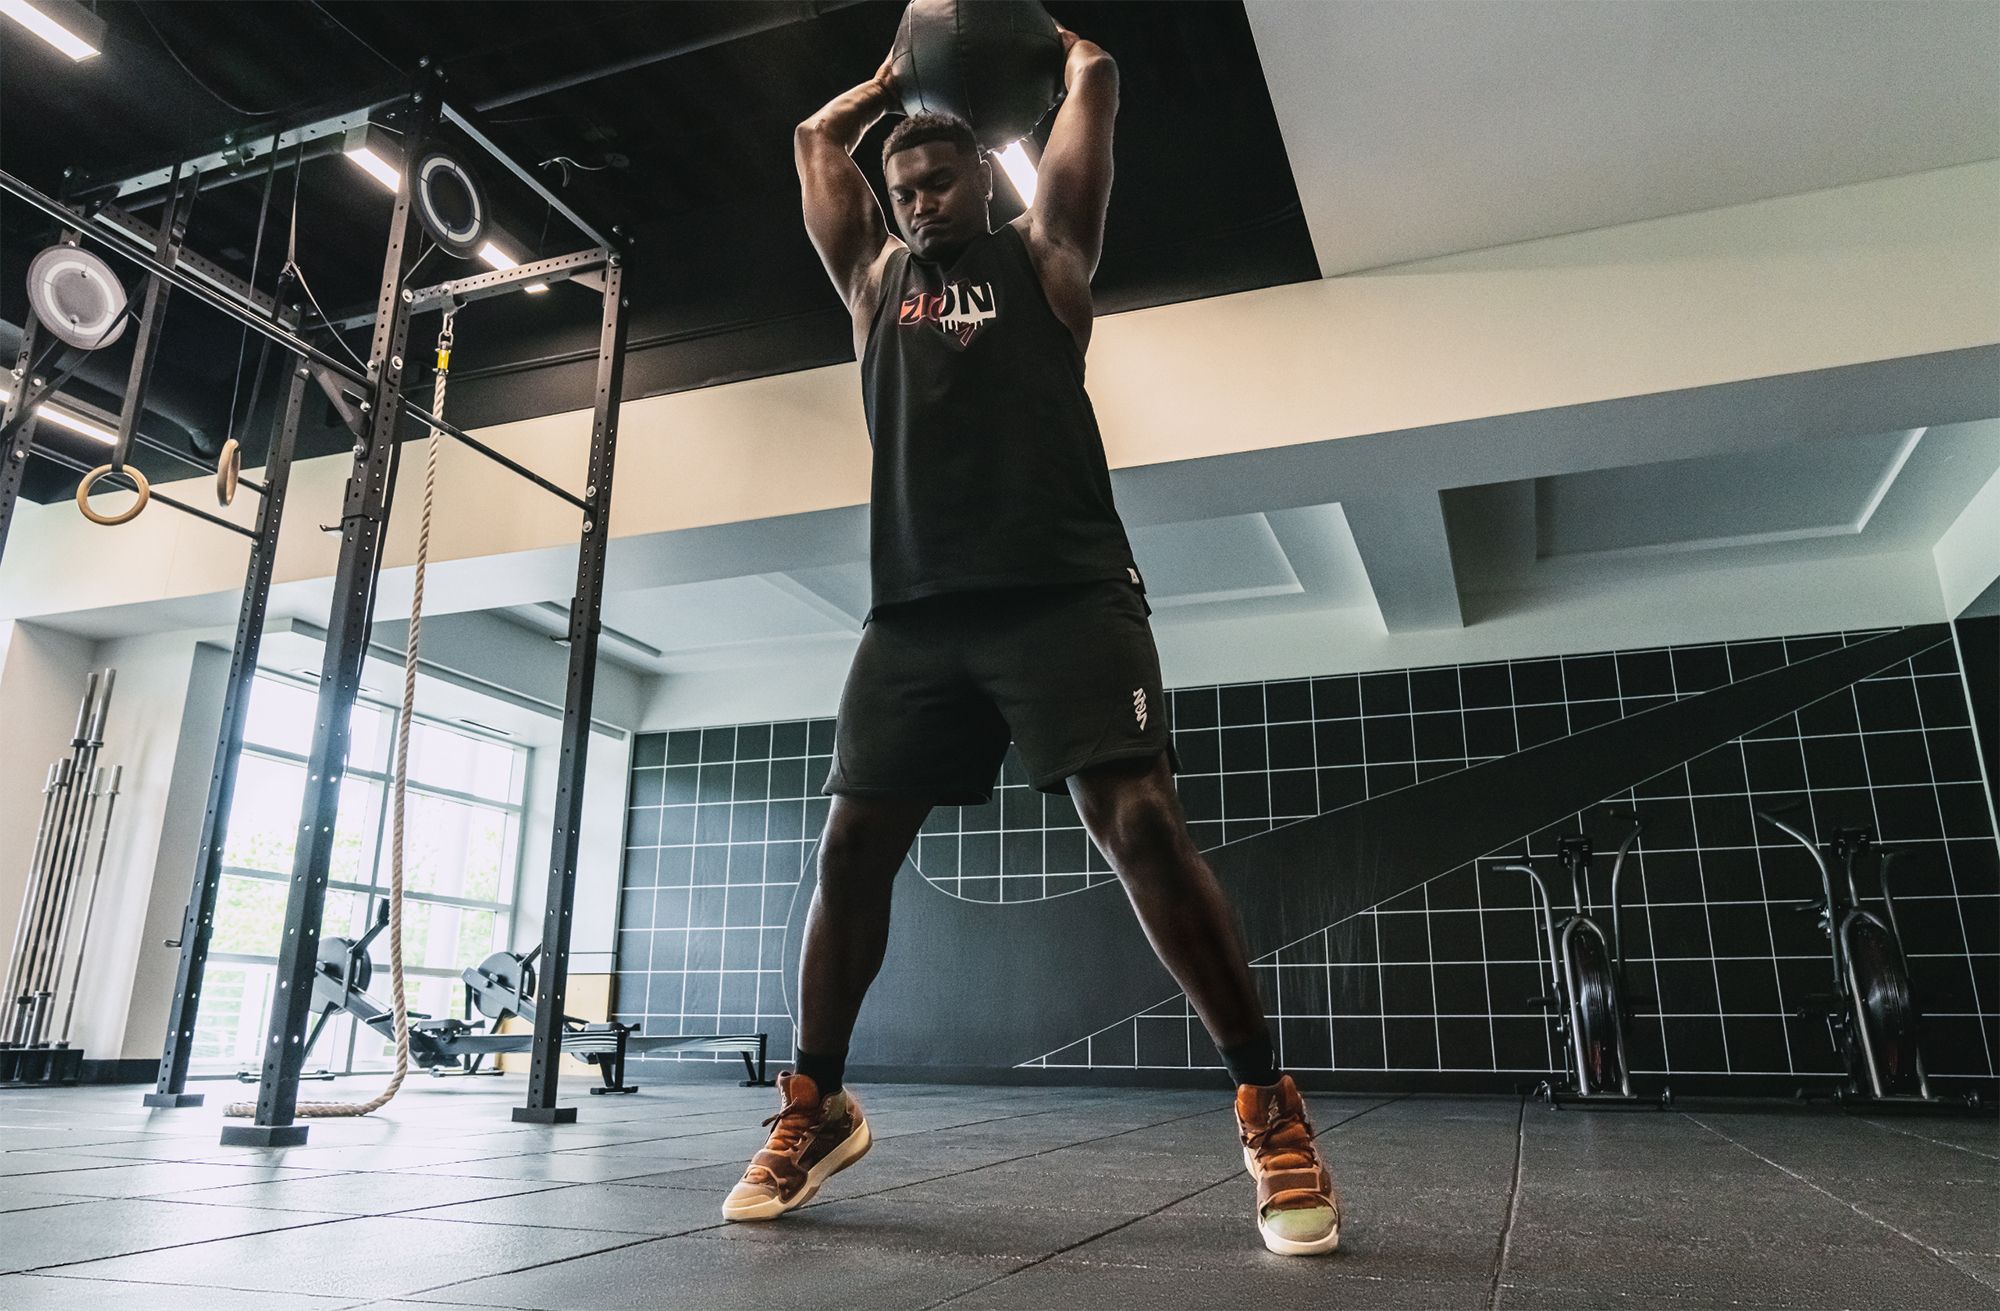 Zion working out in gym with medicine ball over his head